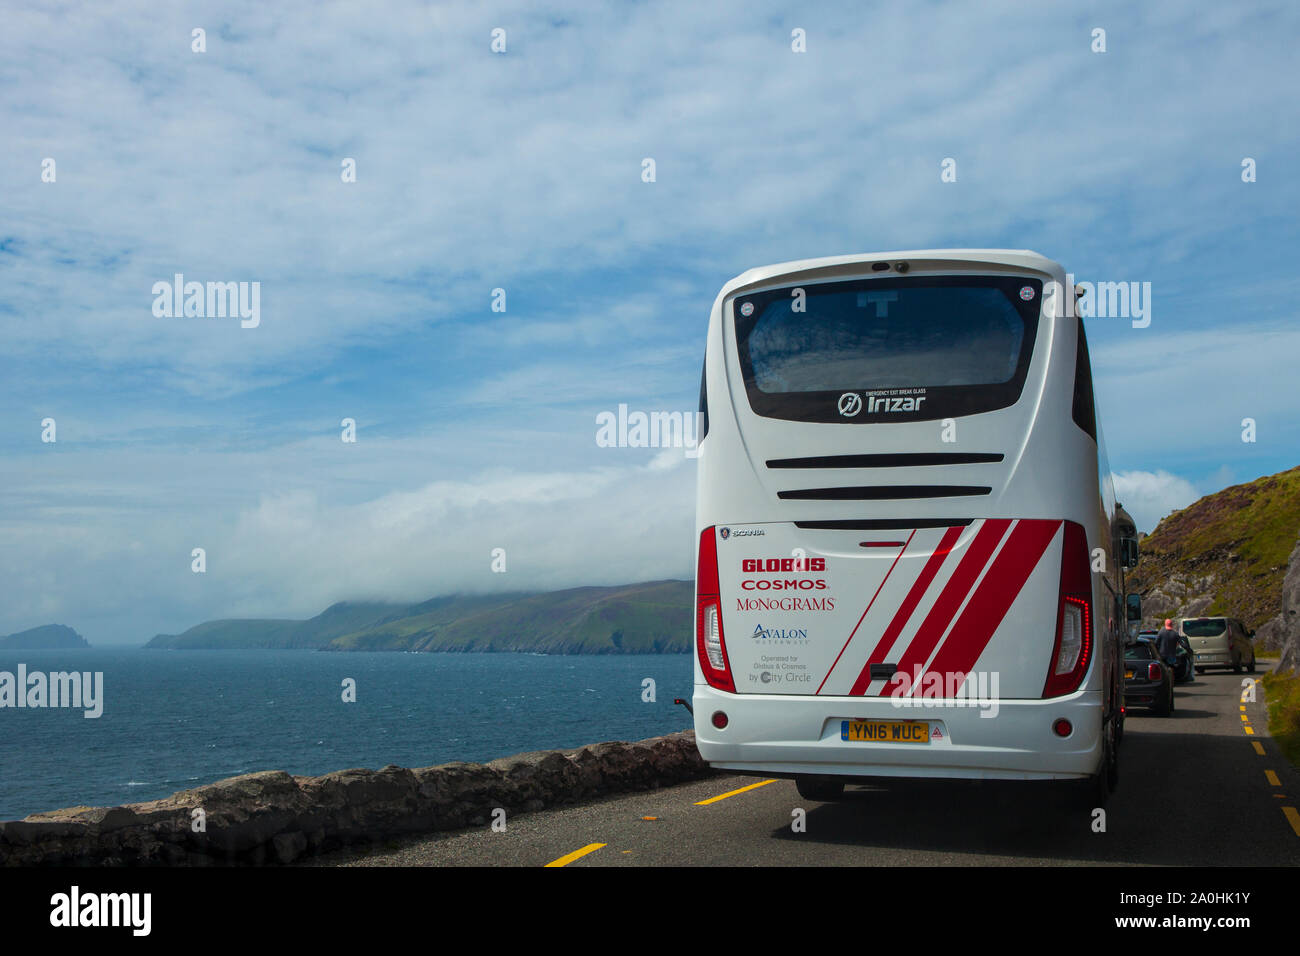 Traffic jam in Paradise - tourist bus and traffic stopped on oneSlea Head, Dingle Peninsula, Co. Kerry, Ireland Stock Photo